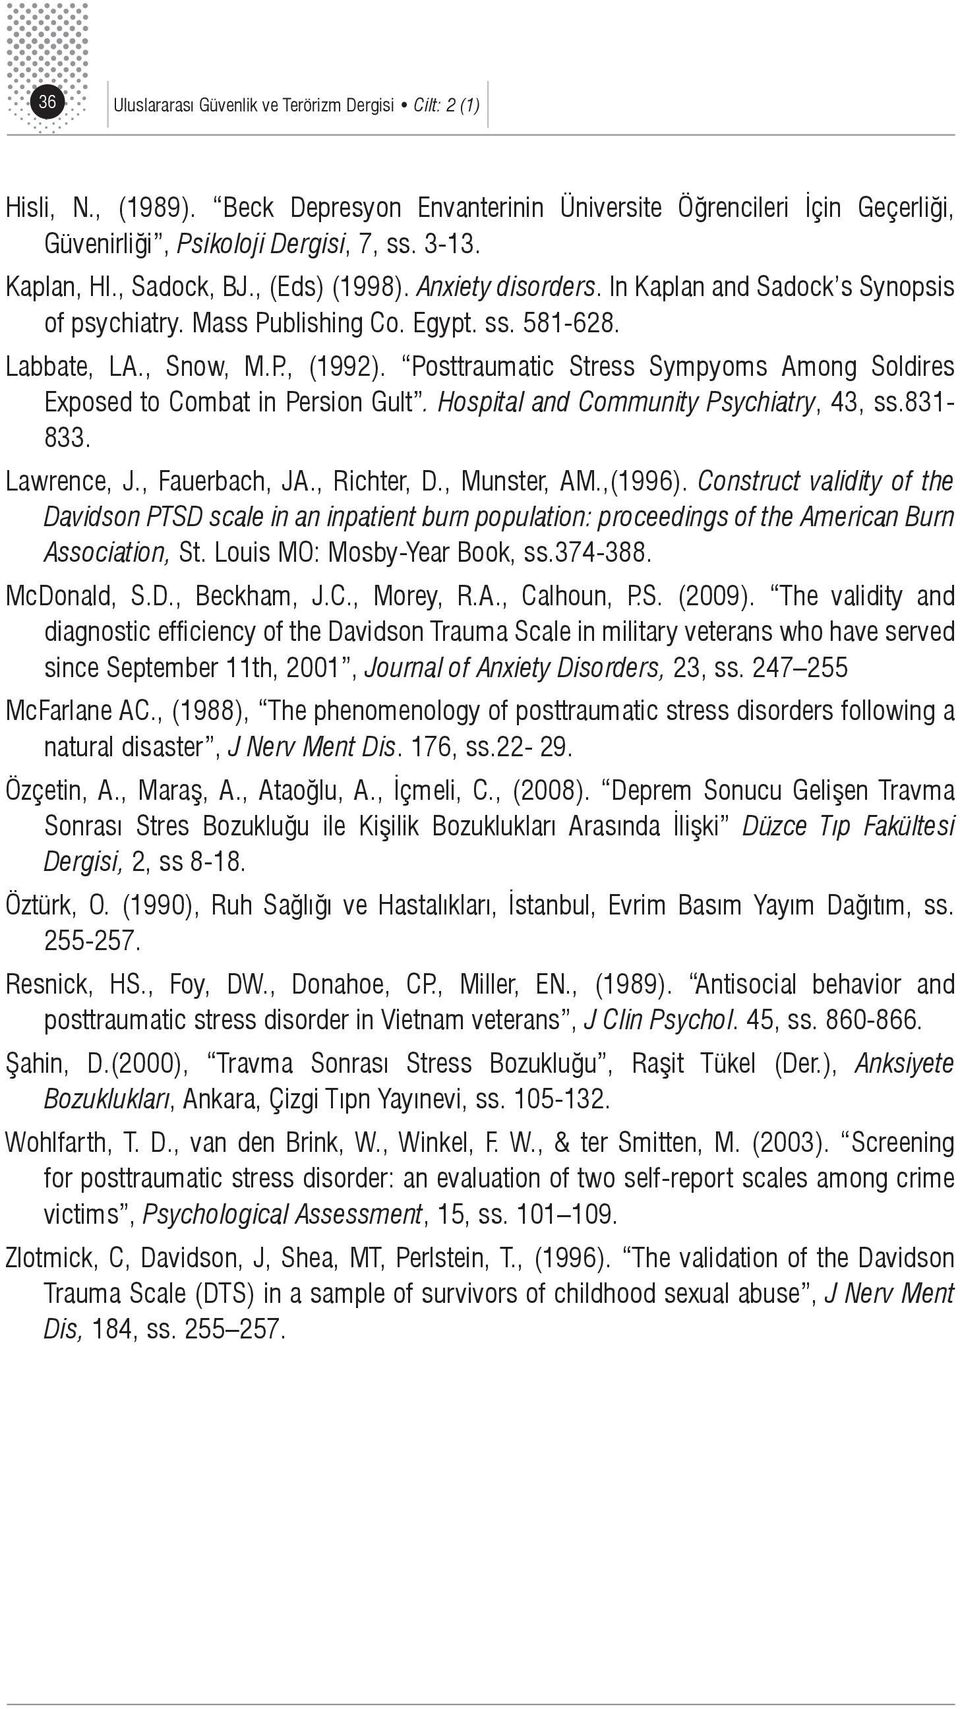 Posttraumatic Stress Sympyoms Among Soldires Exposed to Combat in Persion Gult. Hospital and Community Psychiatry, 43, ss.831-833. Lawrence, J., Fauerbach, JA., Richter, D., Munster, AM.,(1996).